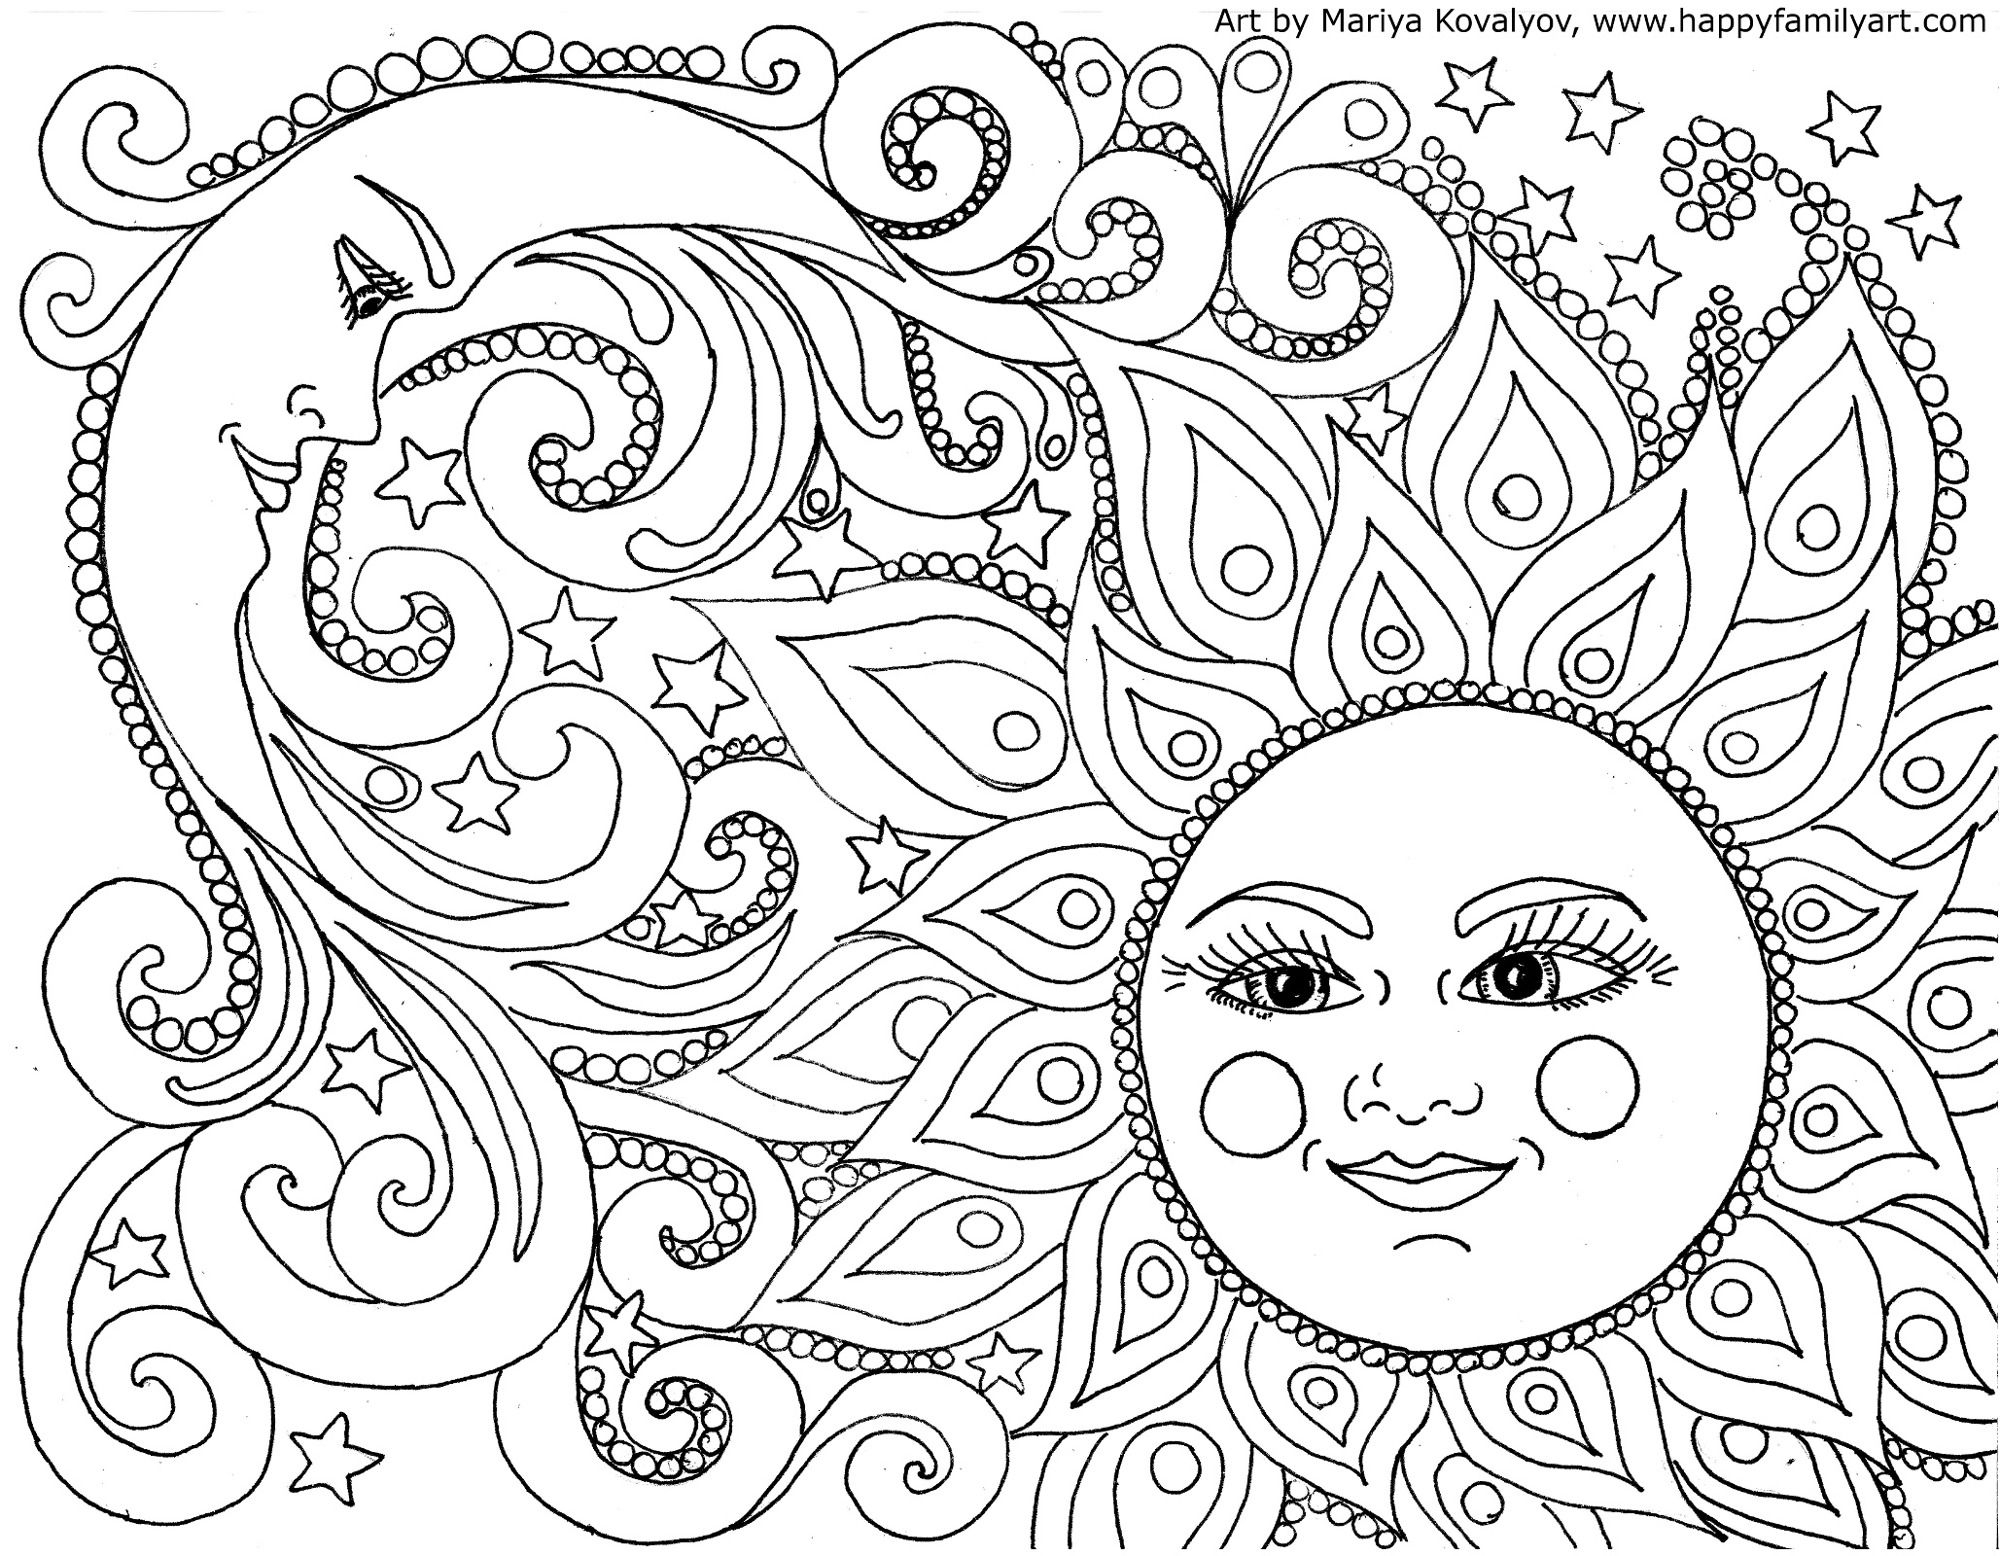 Abstract Coloring Pages For Adults And Artists At GetDrawings Free 